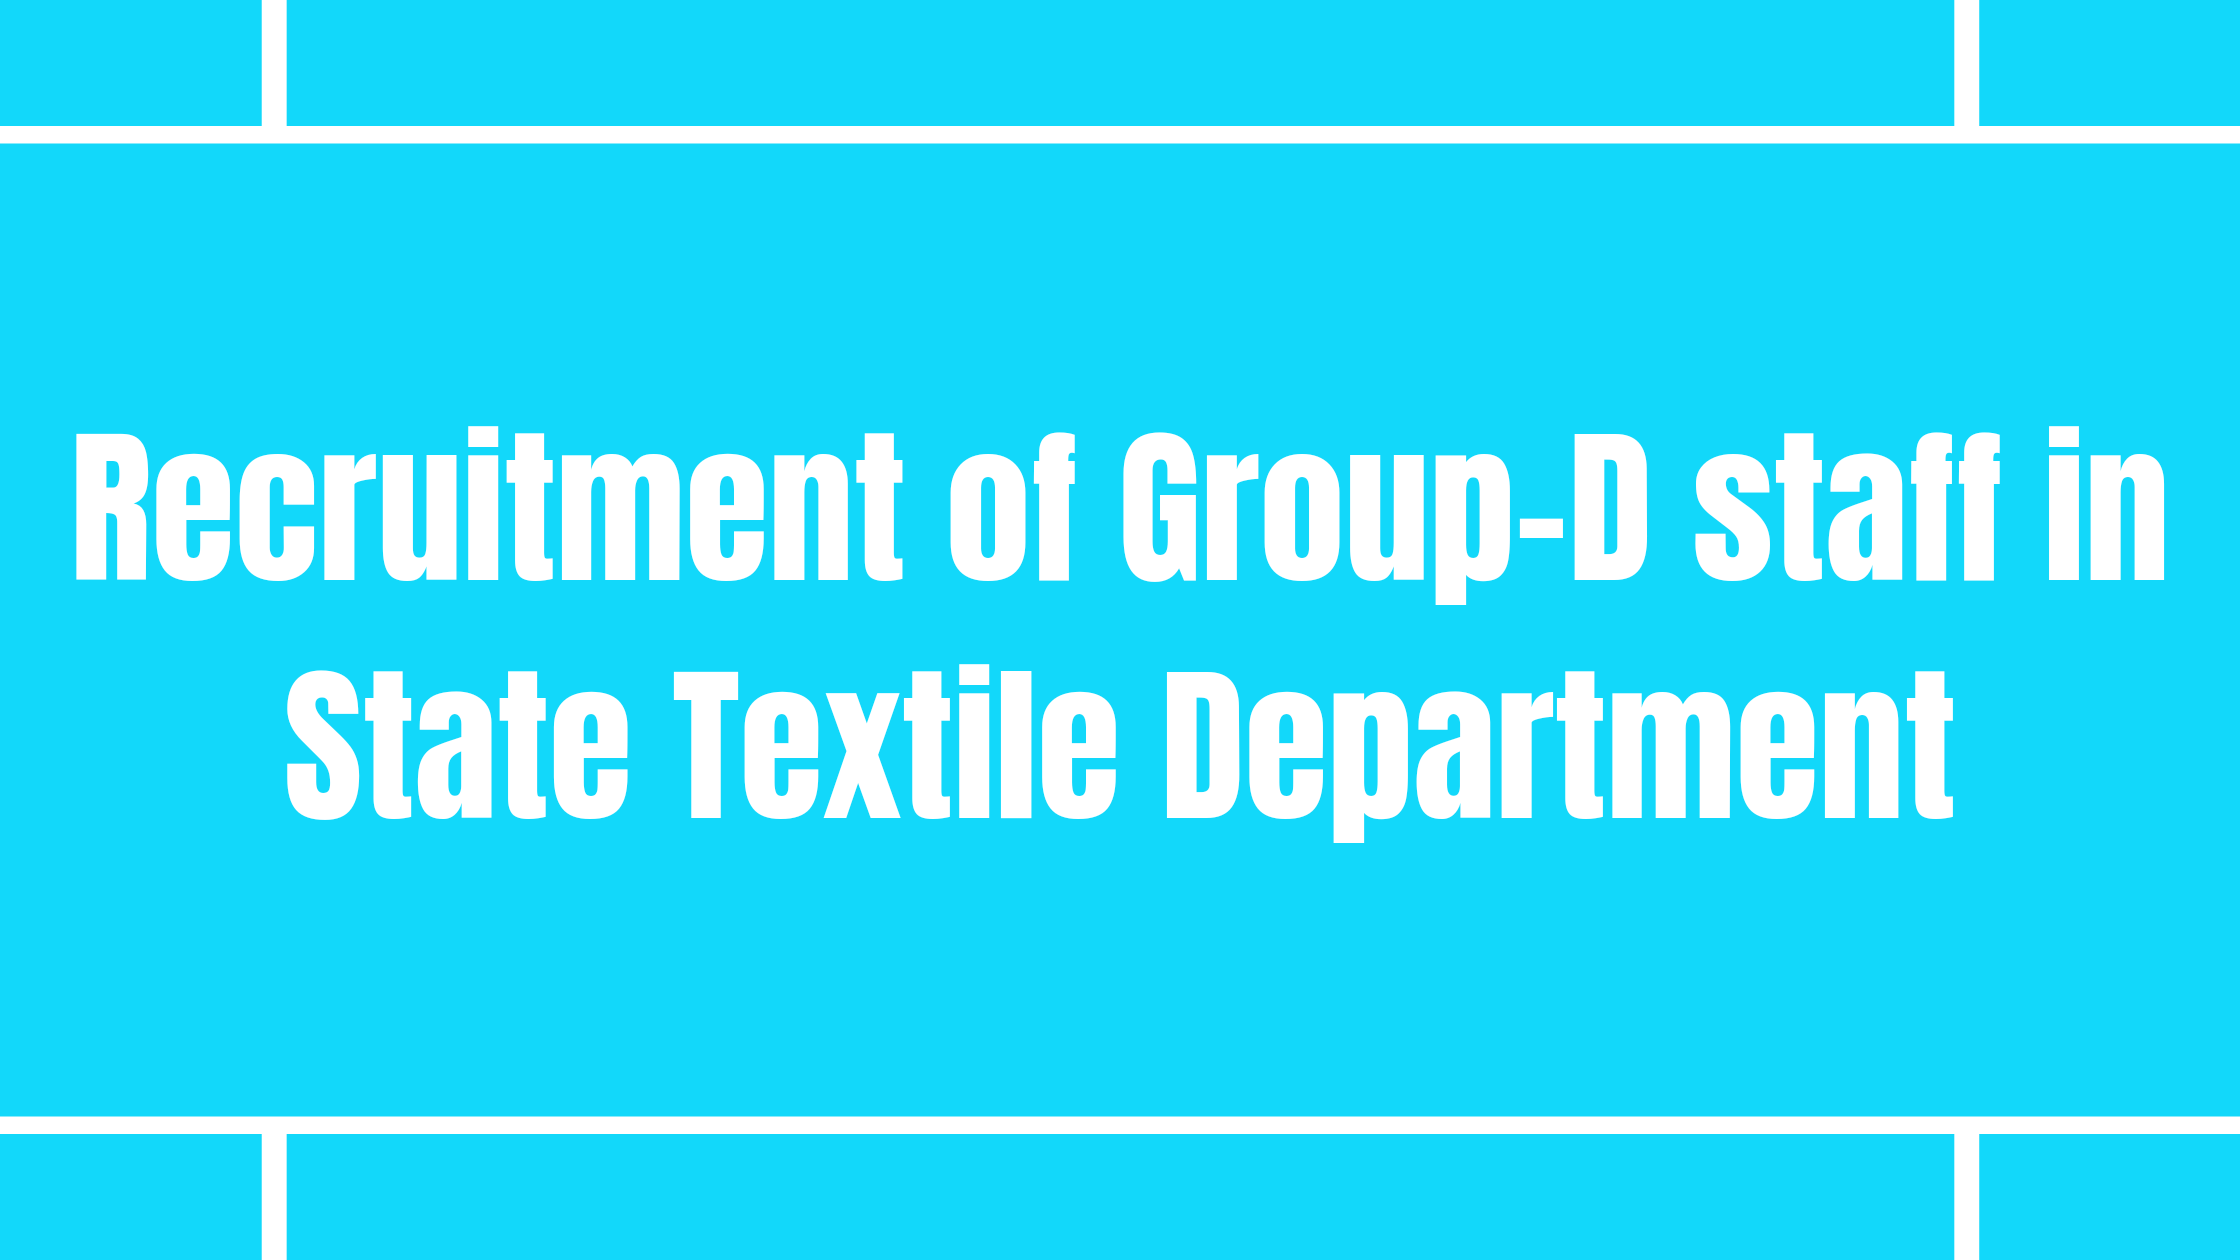 Recruitment of Group-D staff in State Textile Department